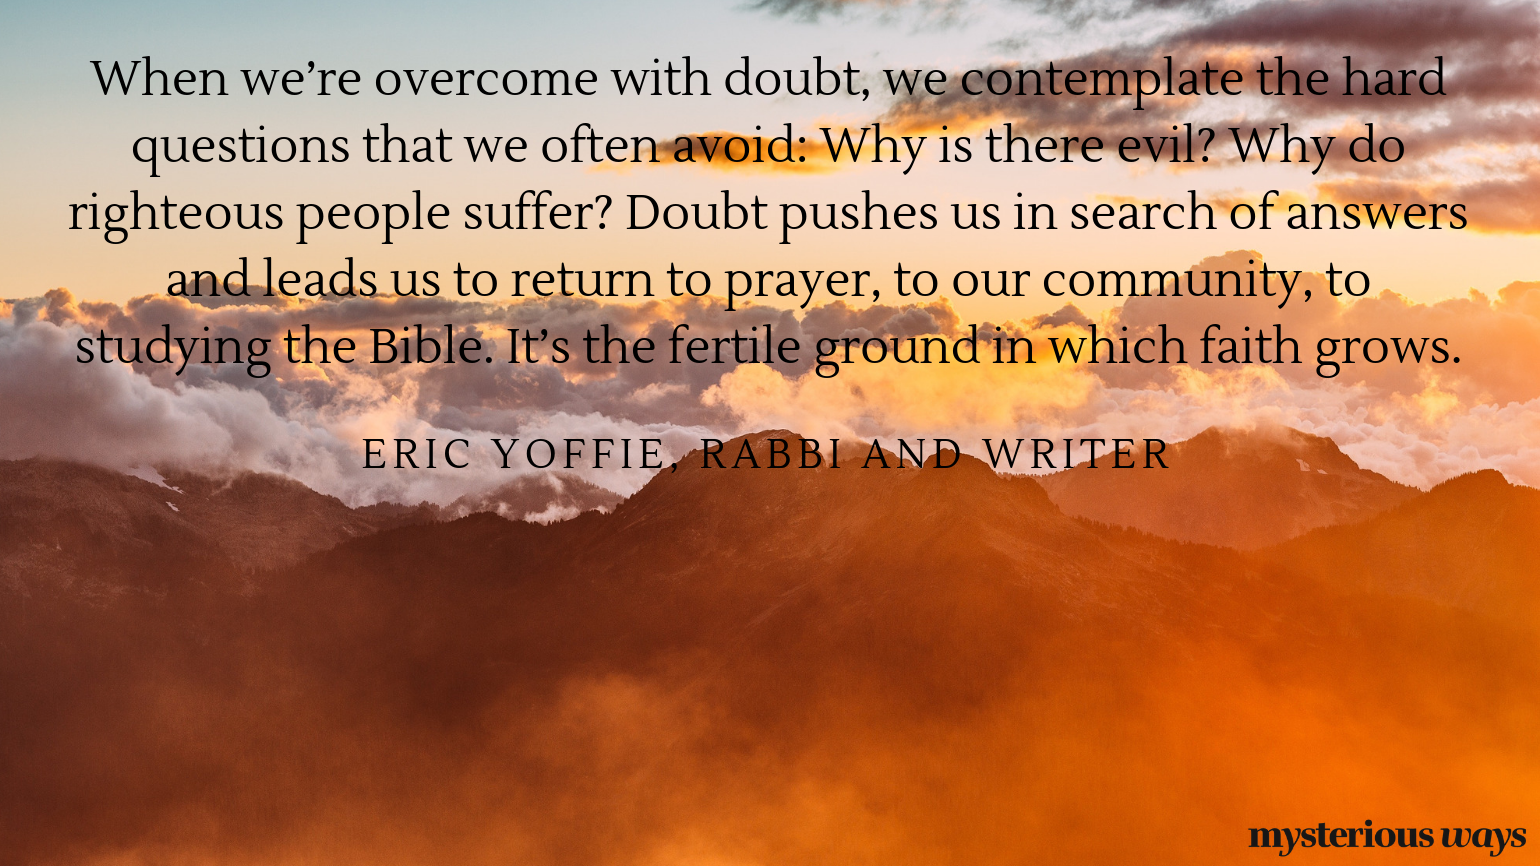 “When we’re overcome with doubt, we contemplate the hard questions that we often avoid: Why is there evil? Why do righteous people suffer? Doubt pushes us in search of answers and leads us to return to prayer, to our community, to studying the Bible. It’s the fertile ground in which faith grows.”